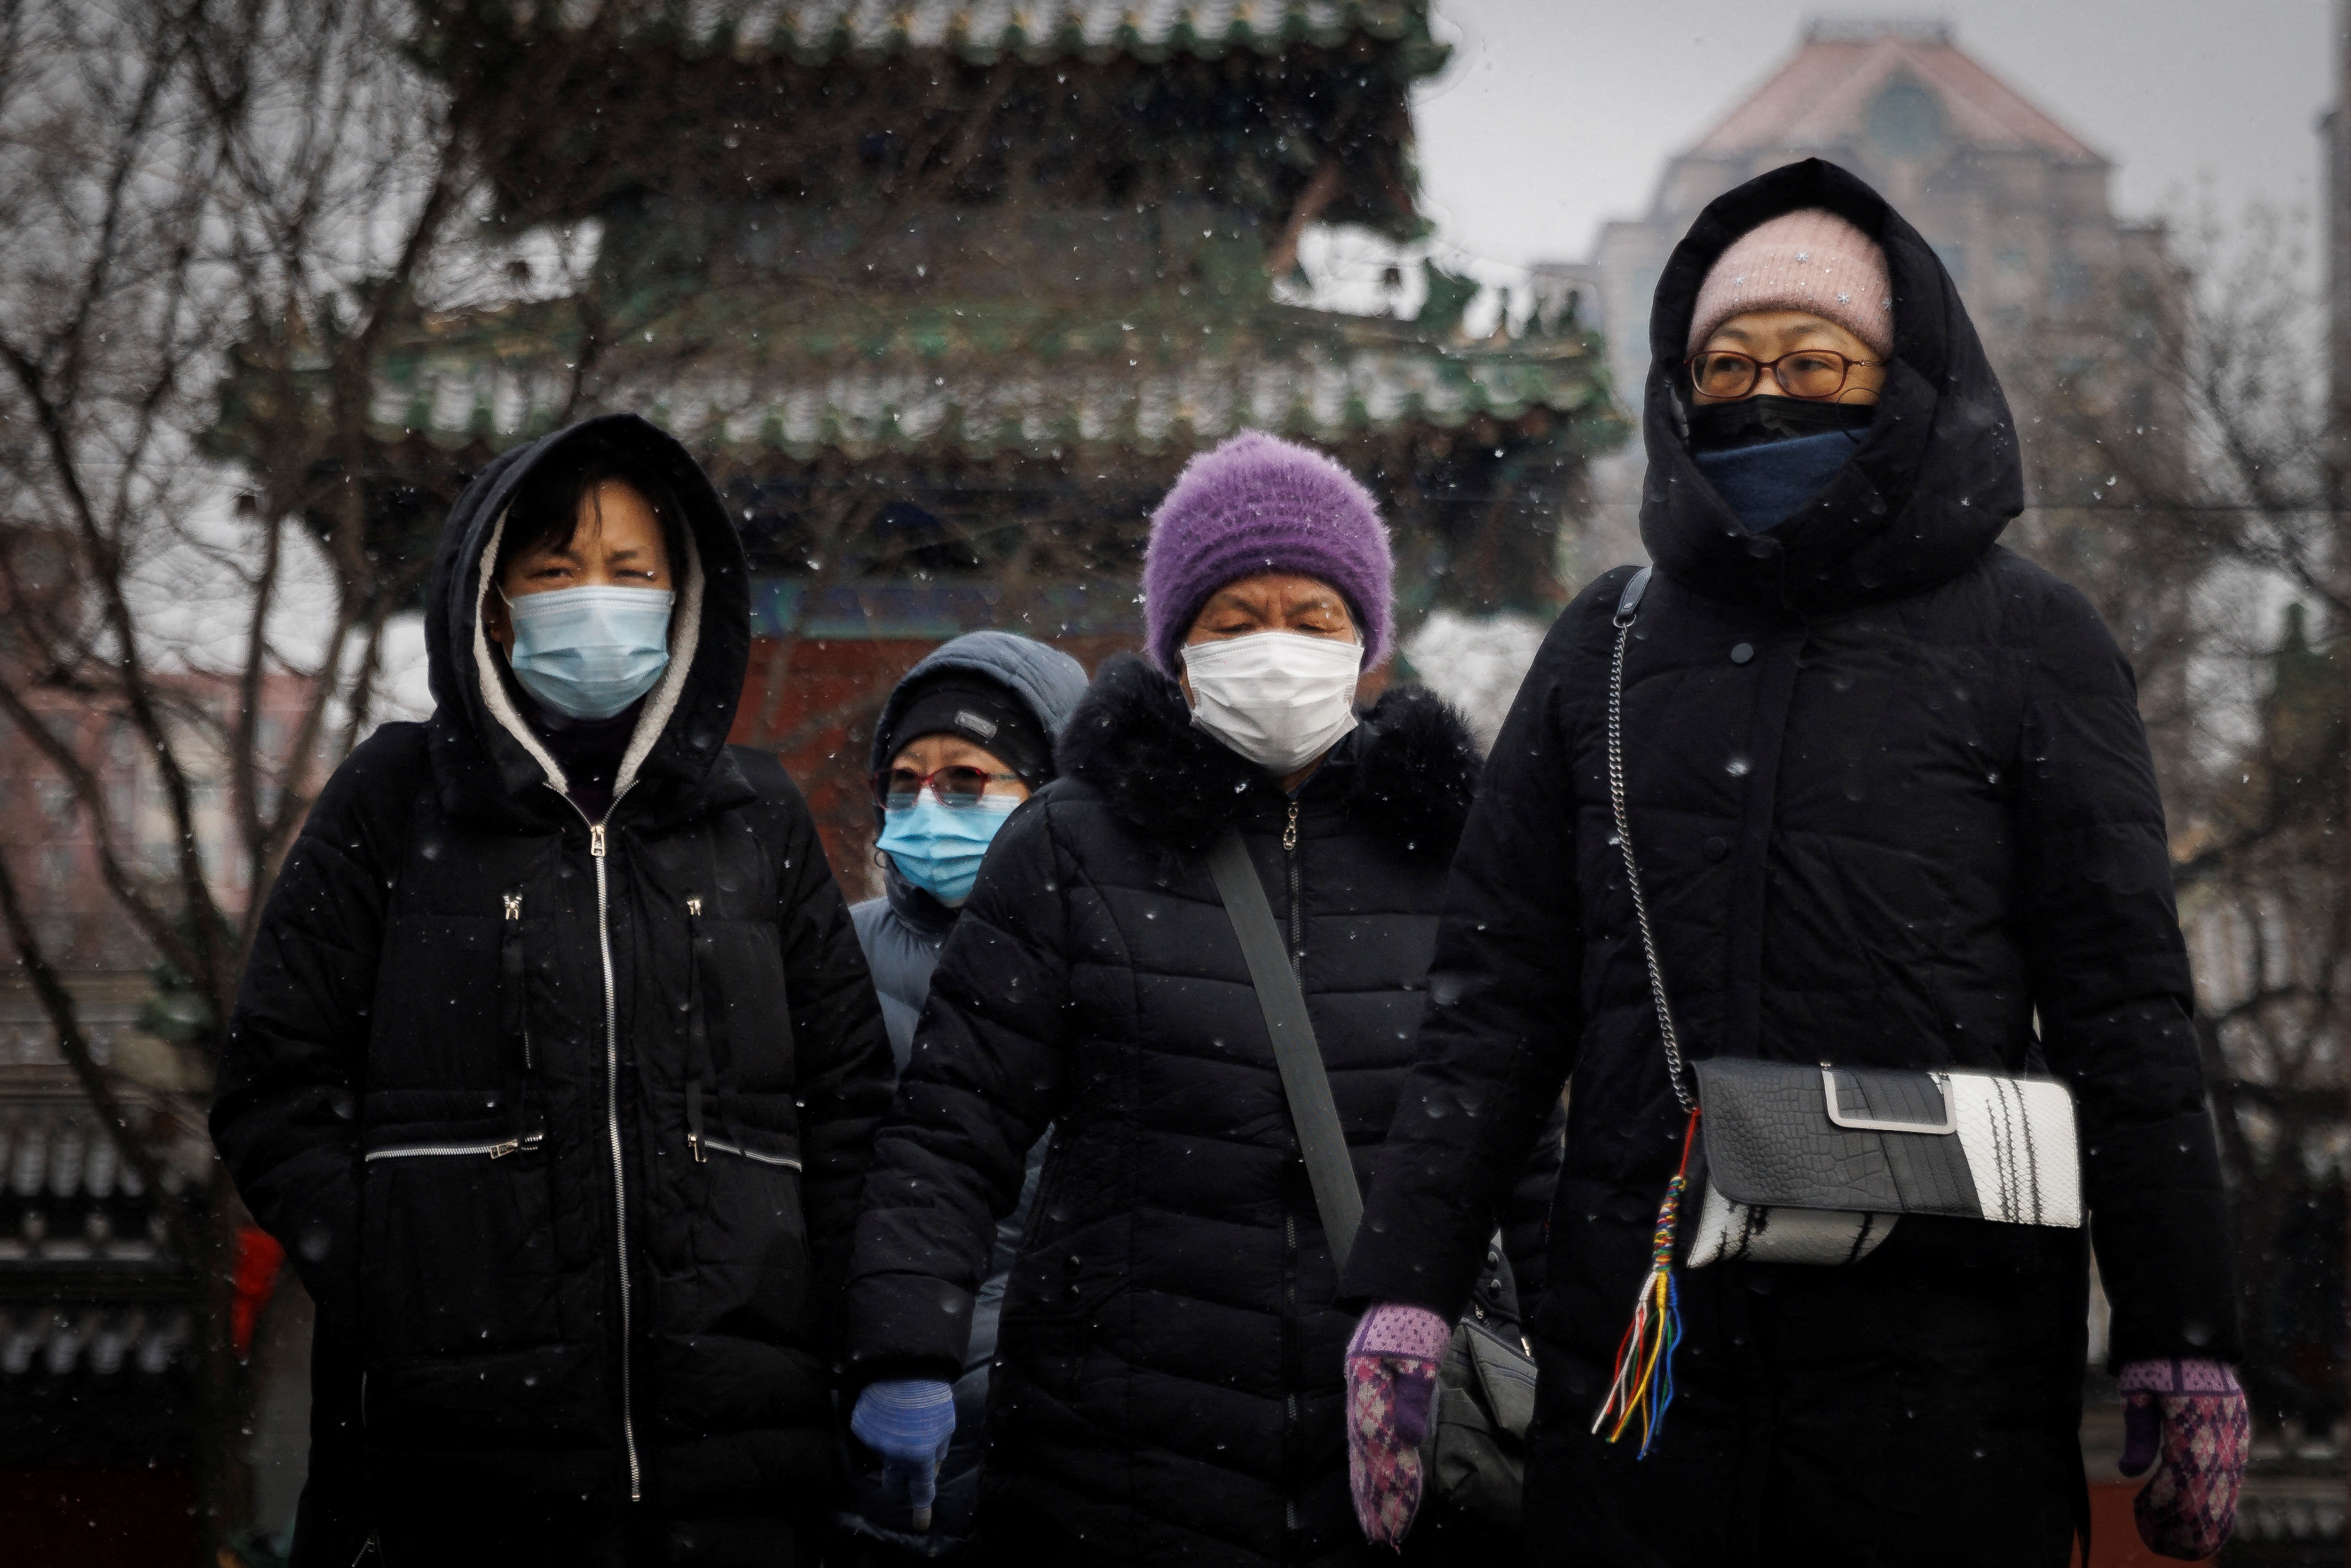 People wear face masks as they walk on a snowy morning as the coronavirus disease (COVID-19) continues in Beijing